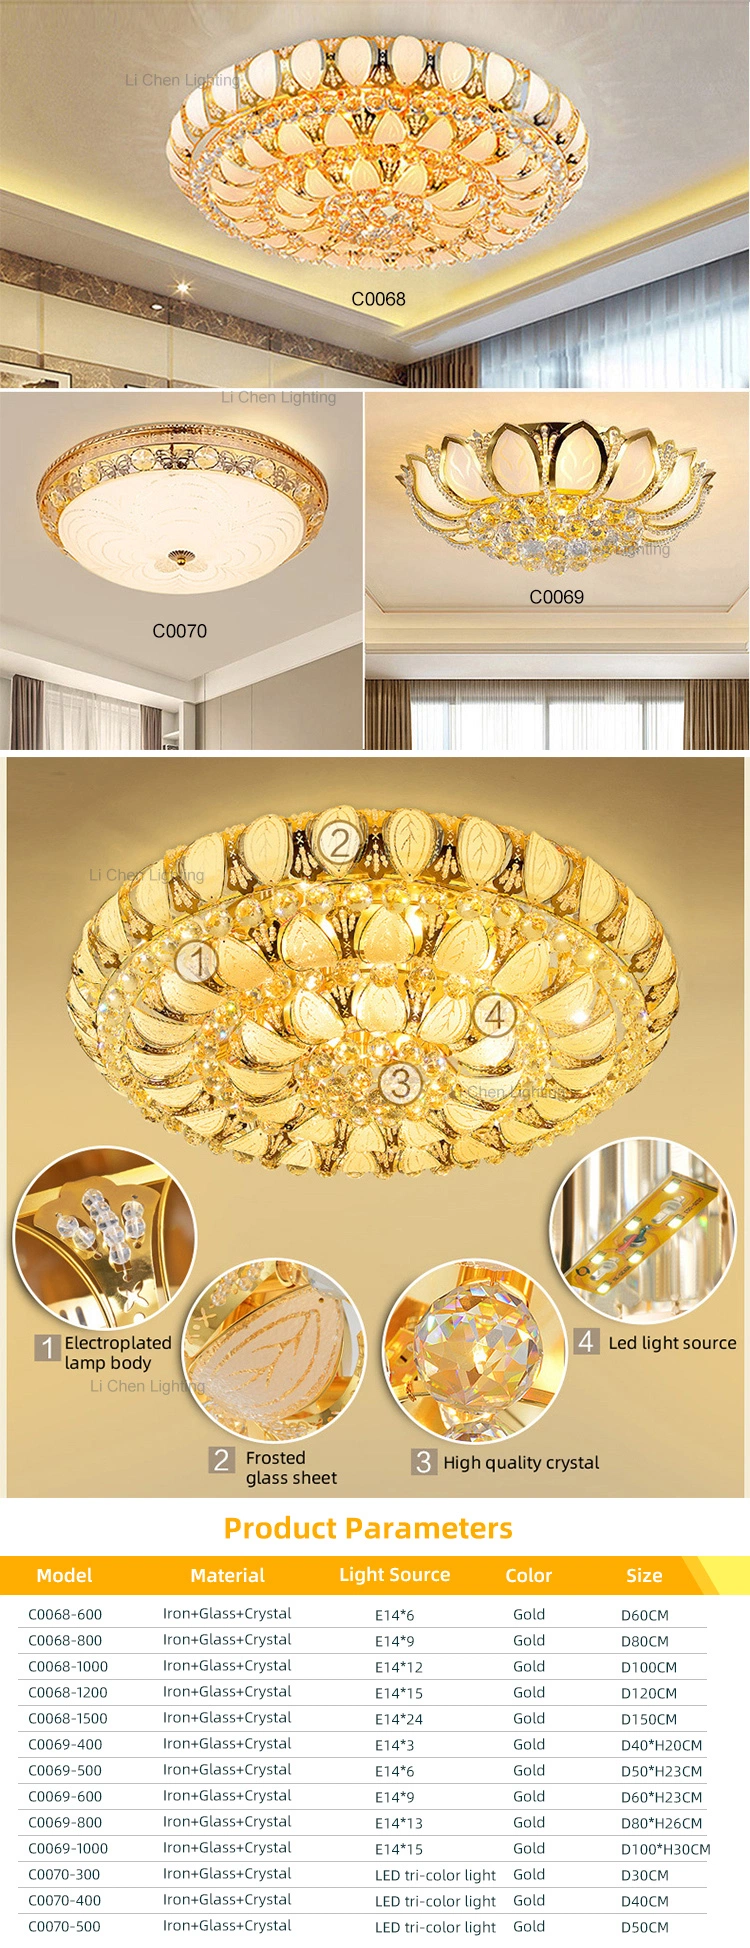 Modern Style Lighting Decorative Living Room Dining Room Glass Crystal LED Ceiling Lamp